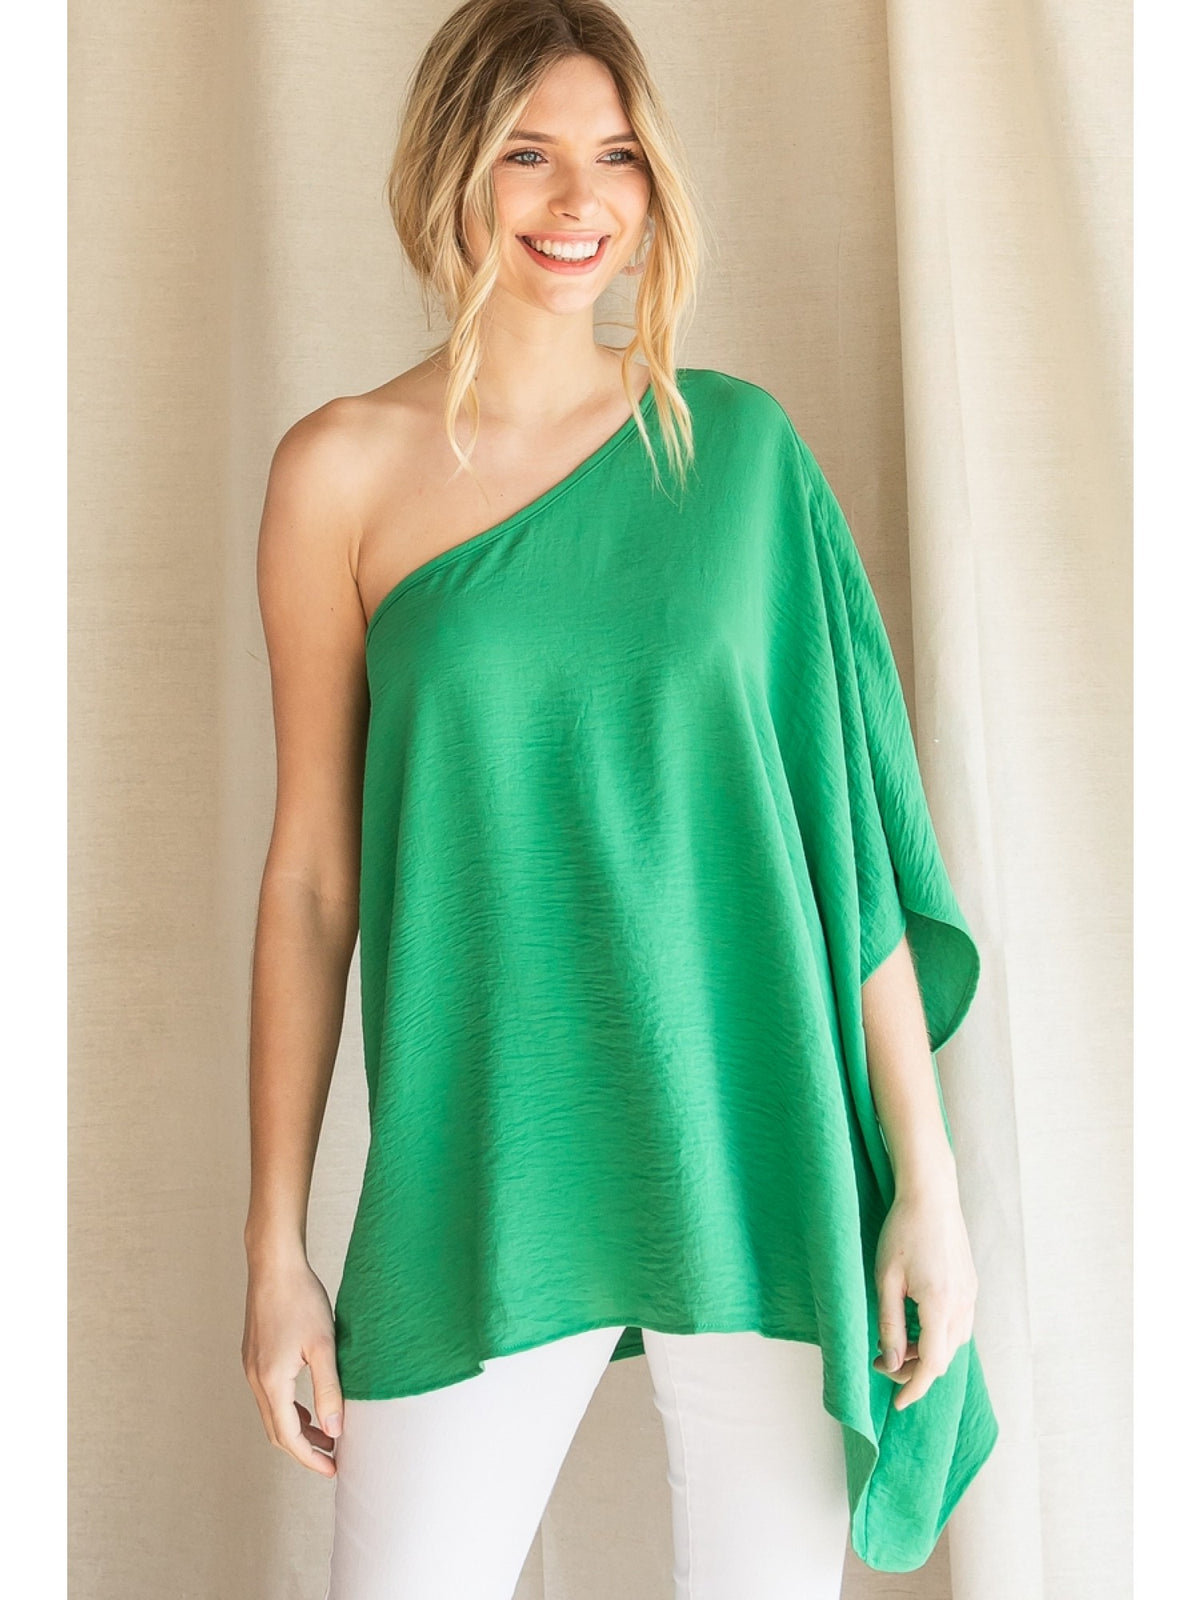 "Kelly" Green Top